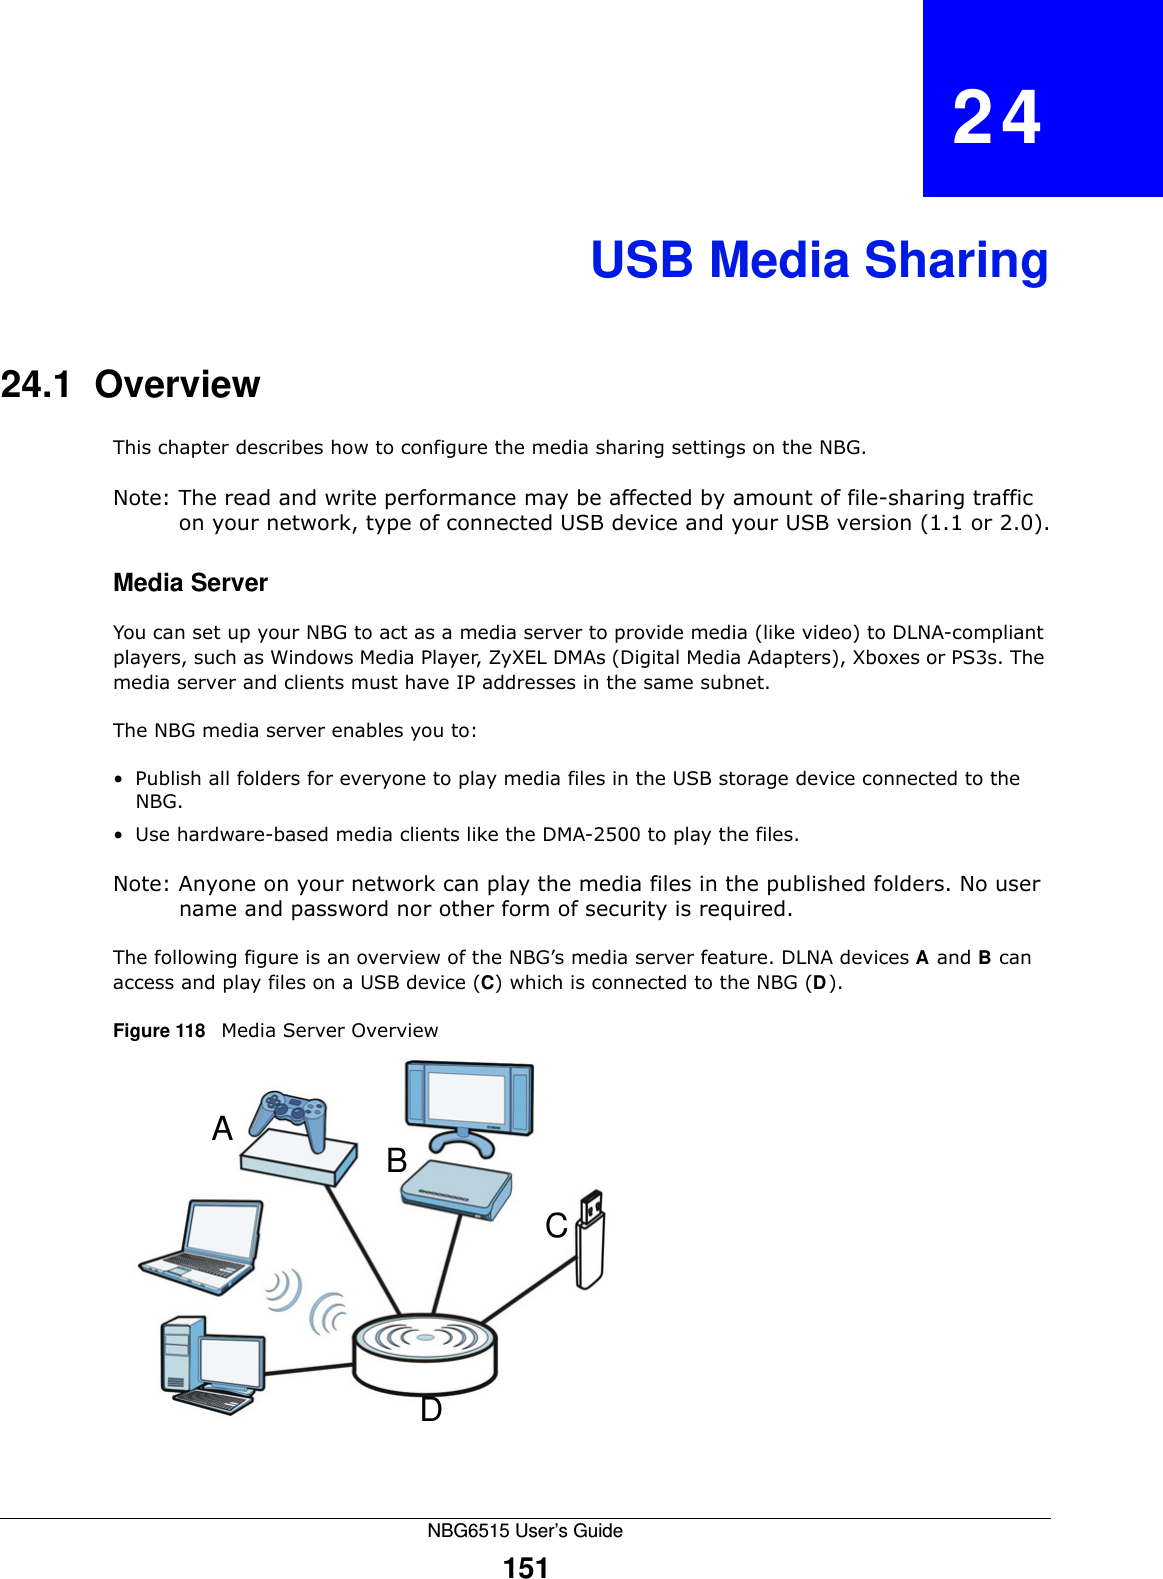 NBG6515 User’s Guide151CHAPTER   24USB Media Sharing24.1  OverviewThis chapter describes how to configure the media sharing settings on the NBG.Note: The read and write performance may be affected by amount of file-sharing traffic on your network, type of connected USB device and your USB version (1.1 or 2.0).Media ServerYou can set up your NBG to act as a media server to provide media (like video) to DLNA-compliant players, such as Windows Media Player, ZyXEL DMAs (Digital Media Adapters), Xboxes or PS3s. The media server and clients must have IP addresses in the same subnet.The NBG media server enables you to:• Publish all folders for everyone to play media files in the USB storage device connected to the NBG.• Use hardware-based media clients like the DMA-2500 to play the files.Note: Anyone on your network can play the media files in the published folders. No user name and password nor other form of security is required. The following figure is an overview of the NBG’s media server feature. DLNA devices A and B can access and play files on a USB device (C) which is connected to the NBG (D).Figure 118   Media Server OverviewABCD